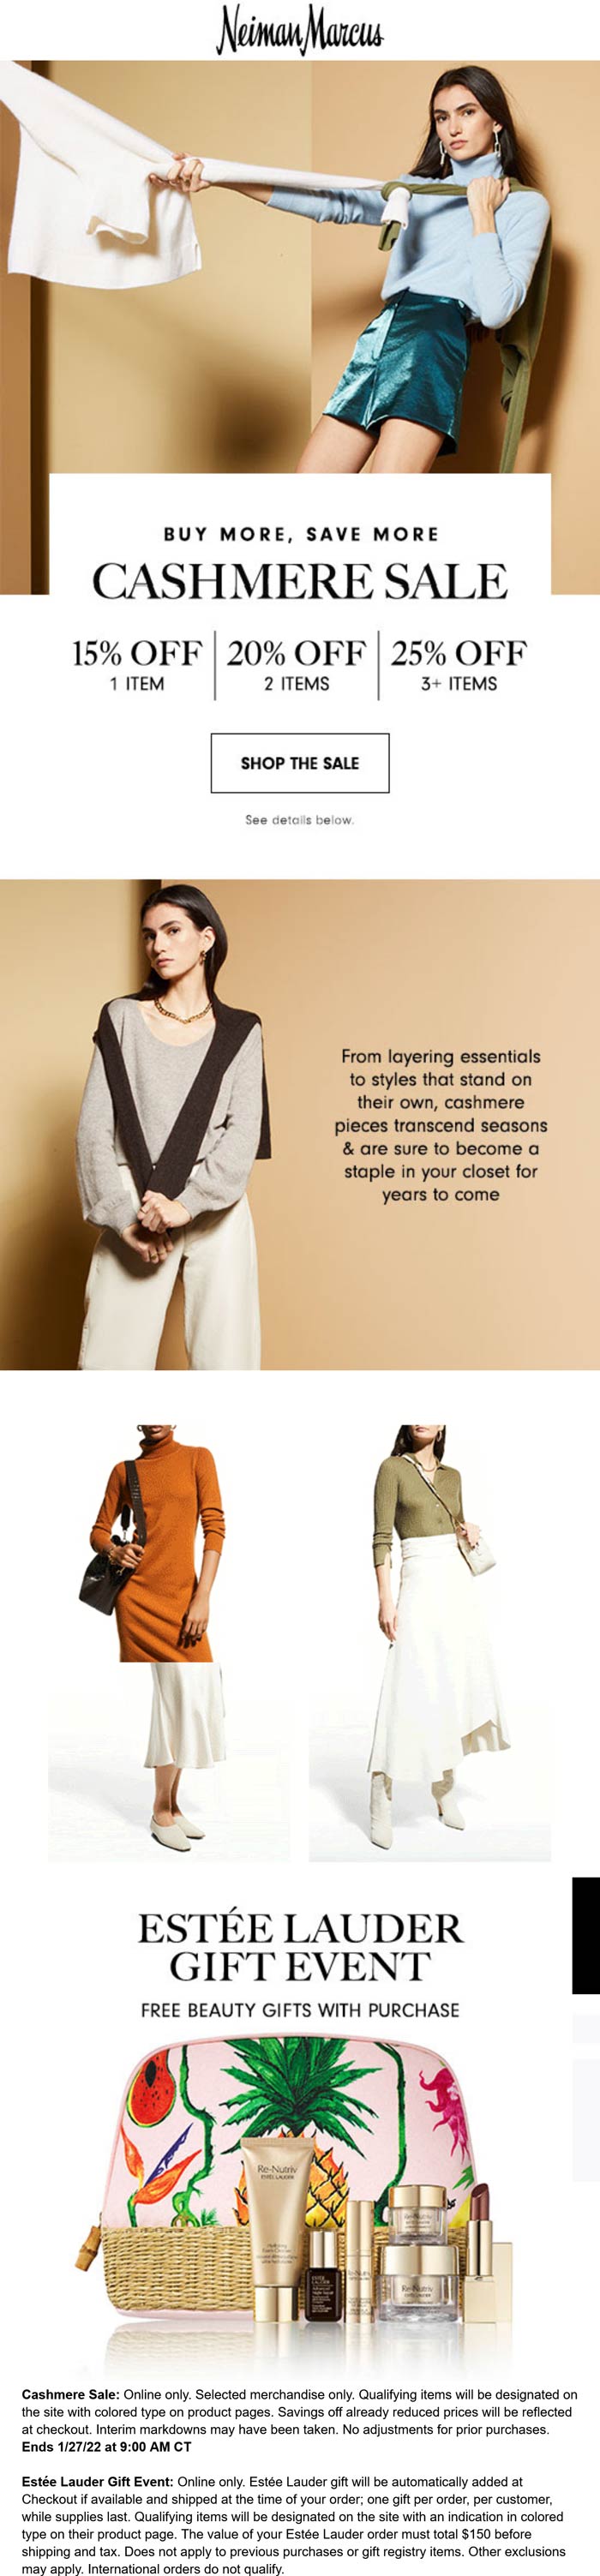 Neiman Marcus stores Coupon  15-25% off cashmere online today at Neiman Marcus #neimanmarcus 